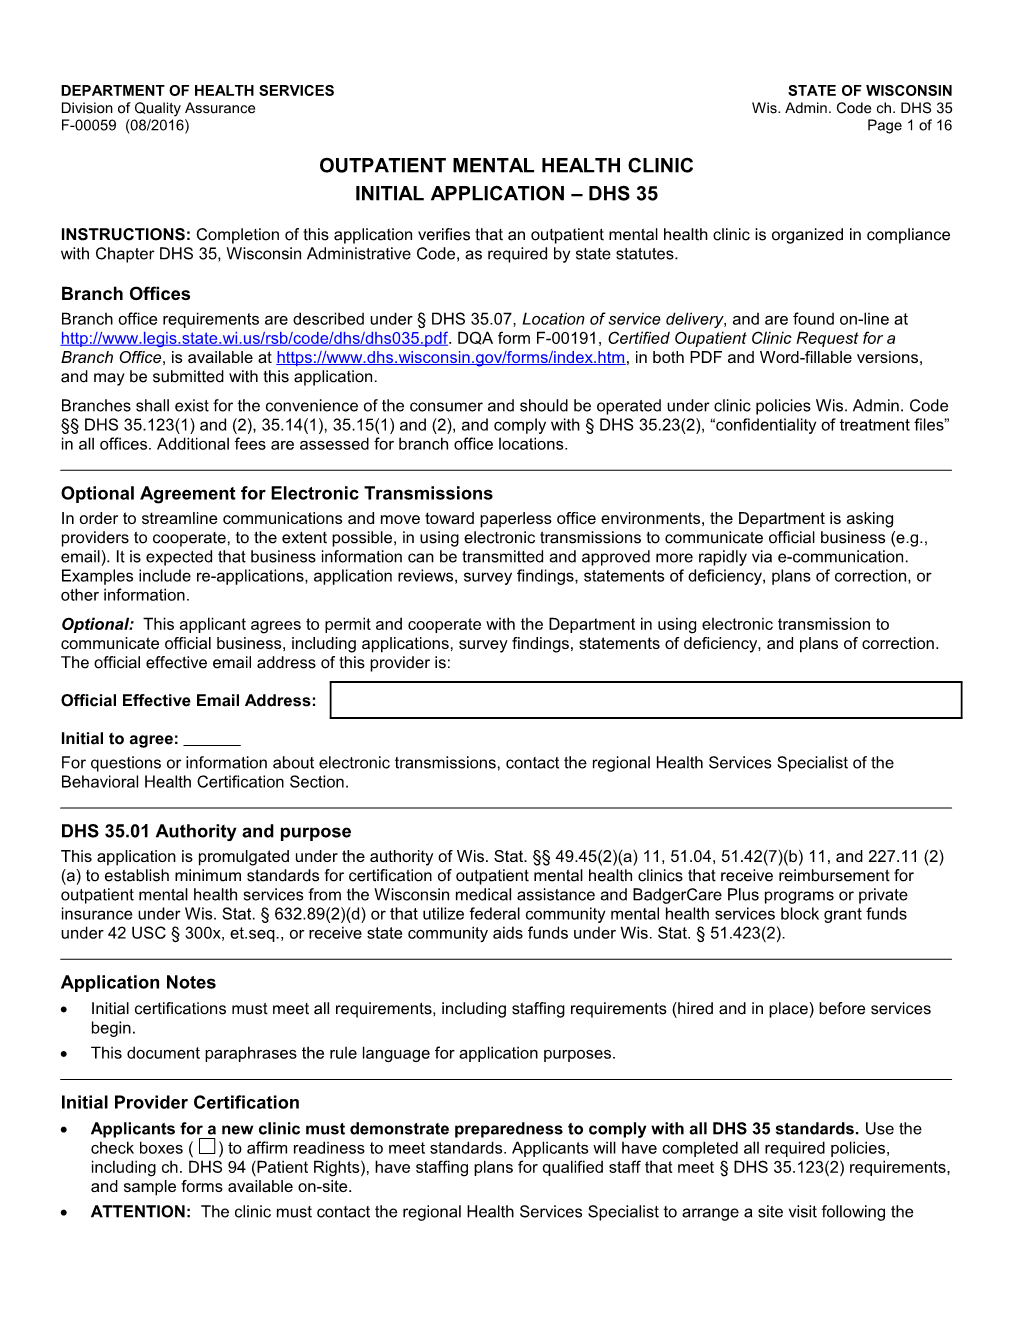 Outpatient Mental Health Clinic Initial Application - DHS 35, F-00059